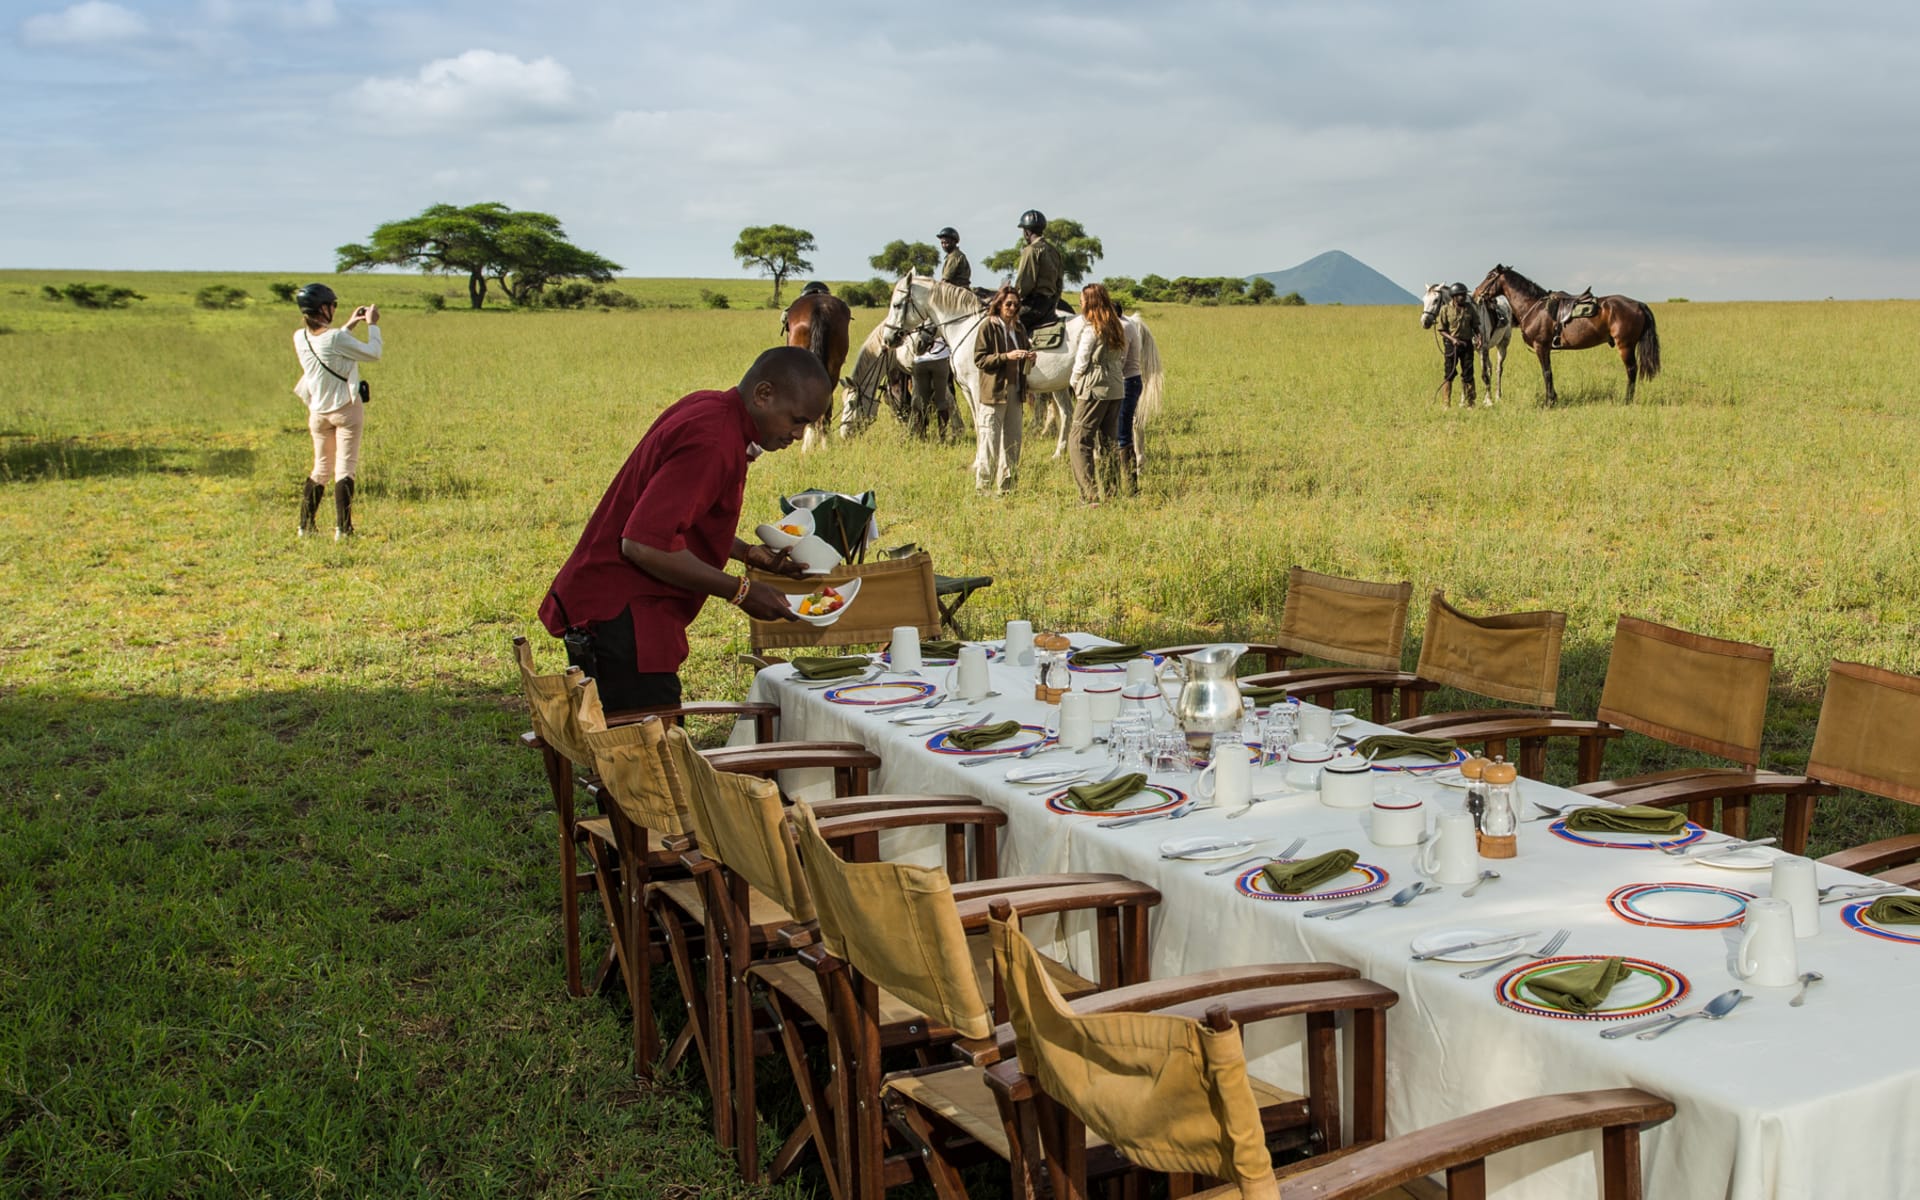 A man is setting up a long table in Amboseli National Park while others are horseriding. 